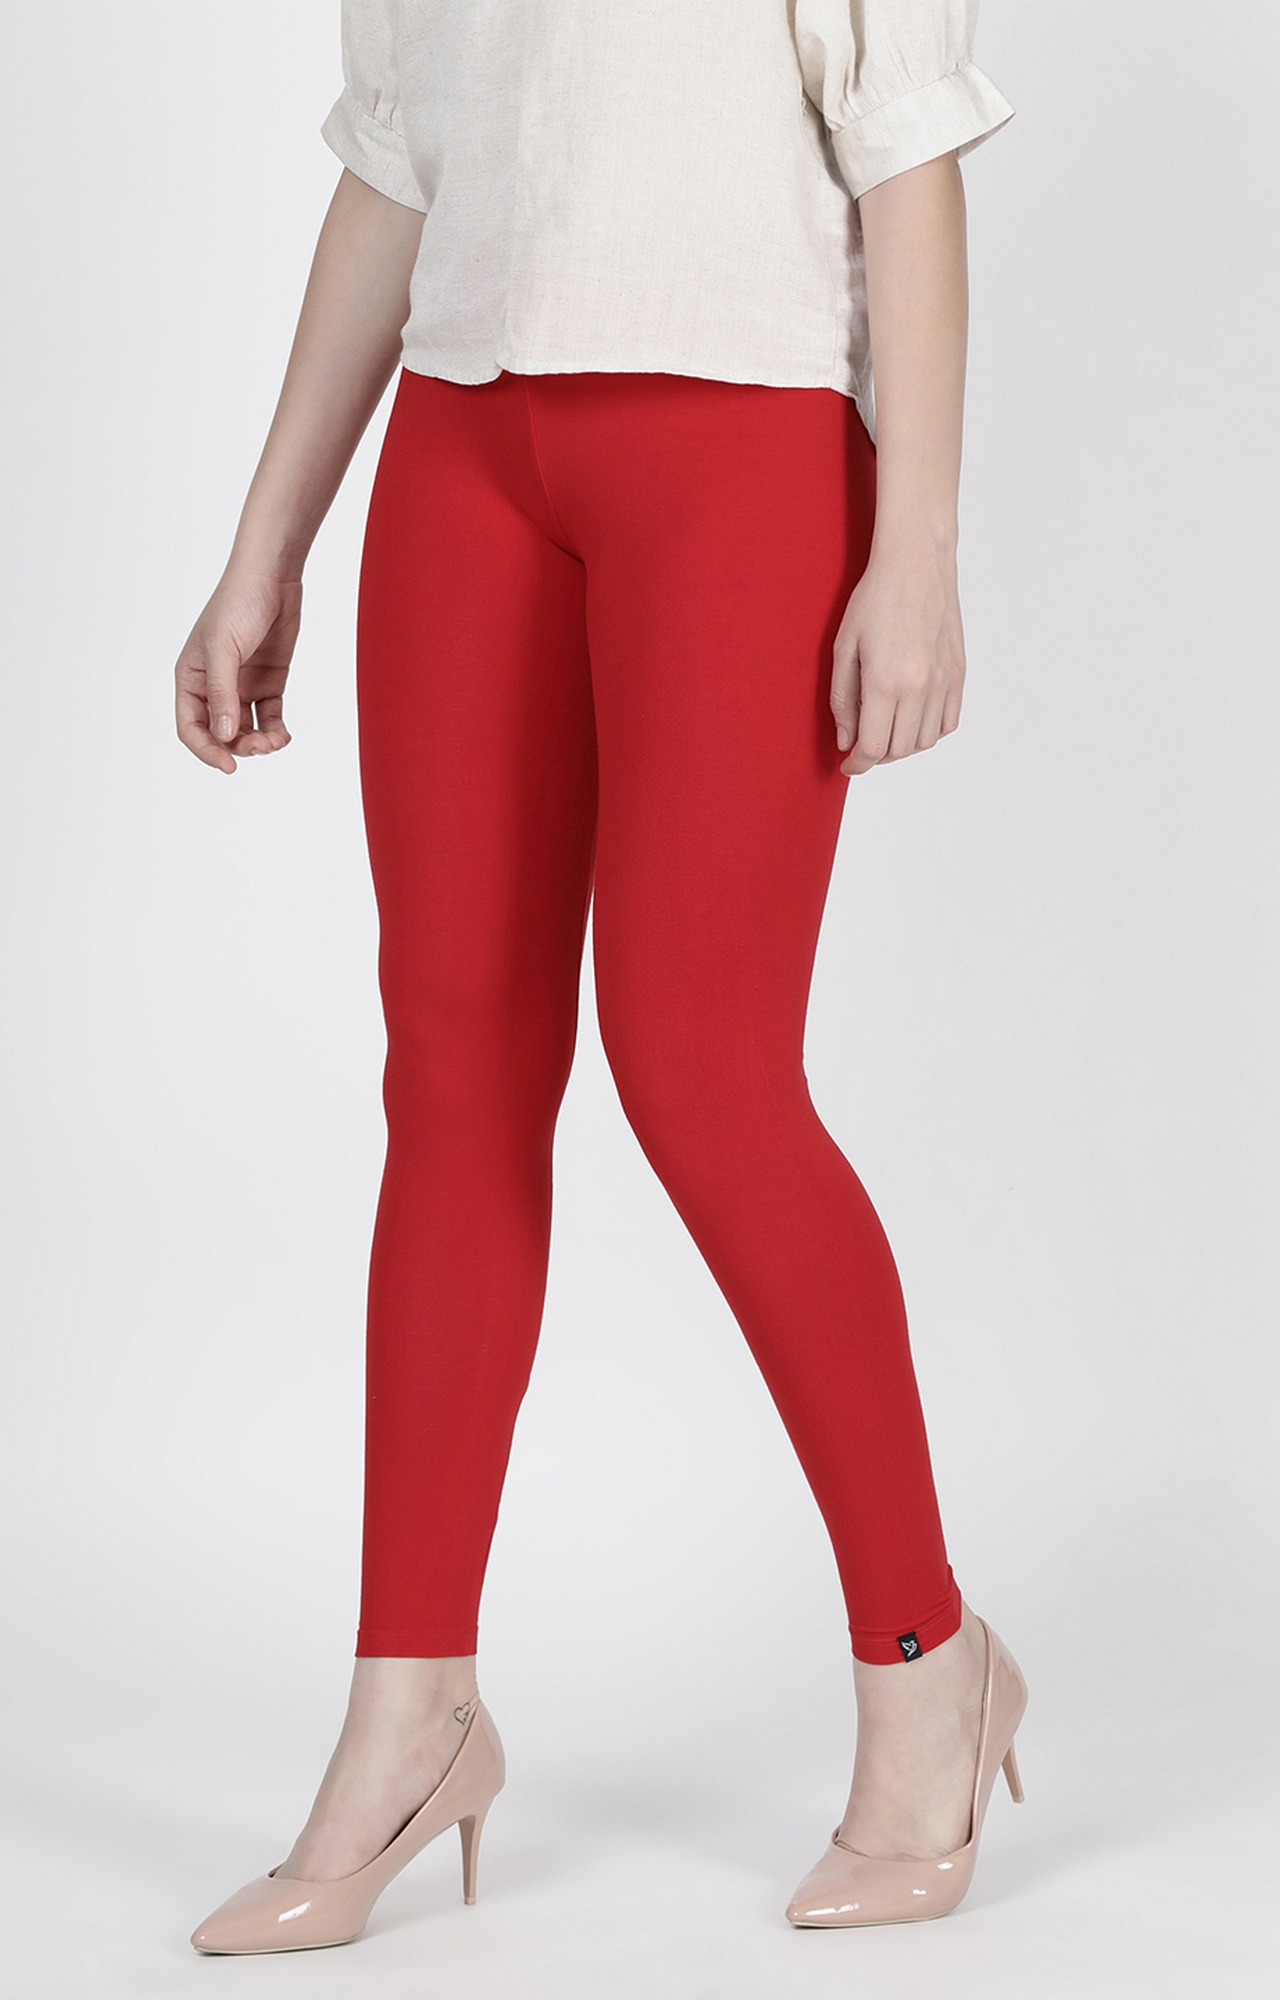 Twinbirds Spiced coral Women Ankle Legging - Radiant Series